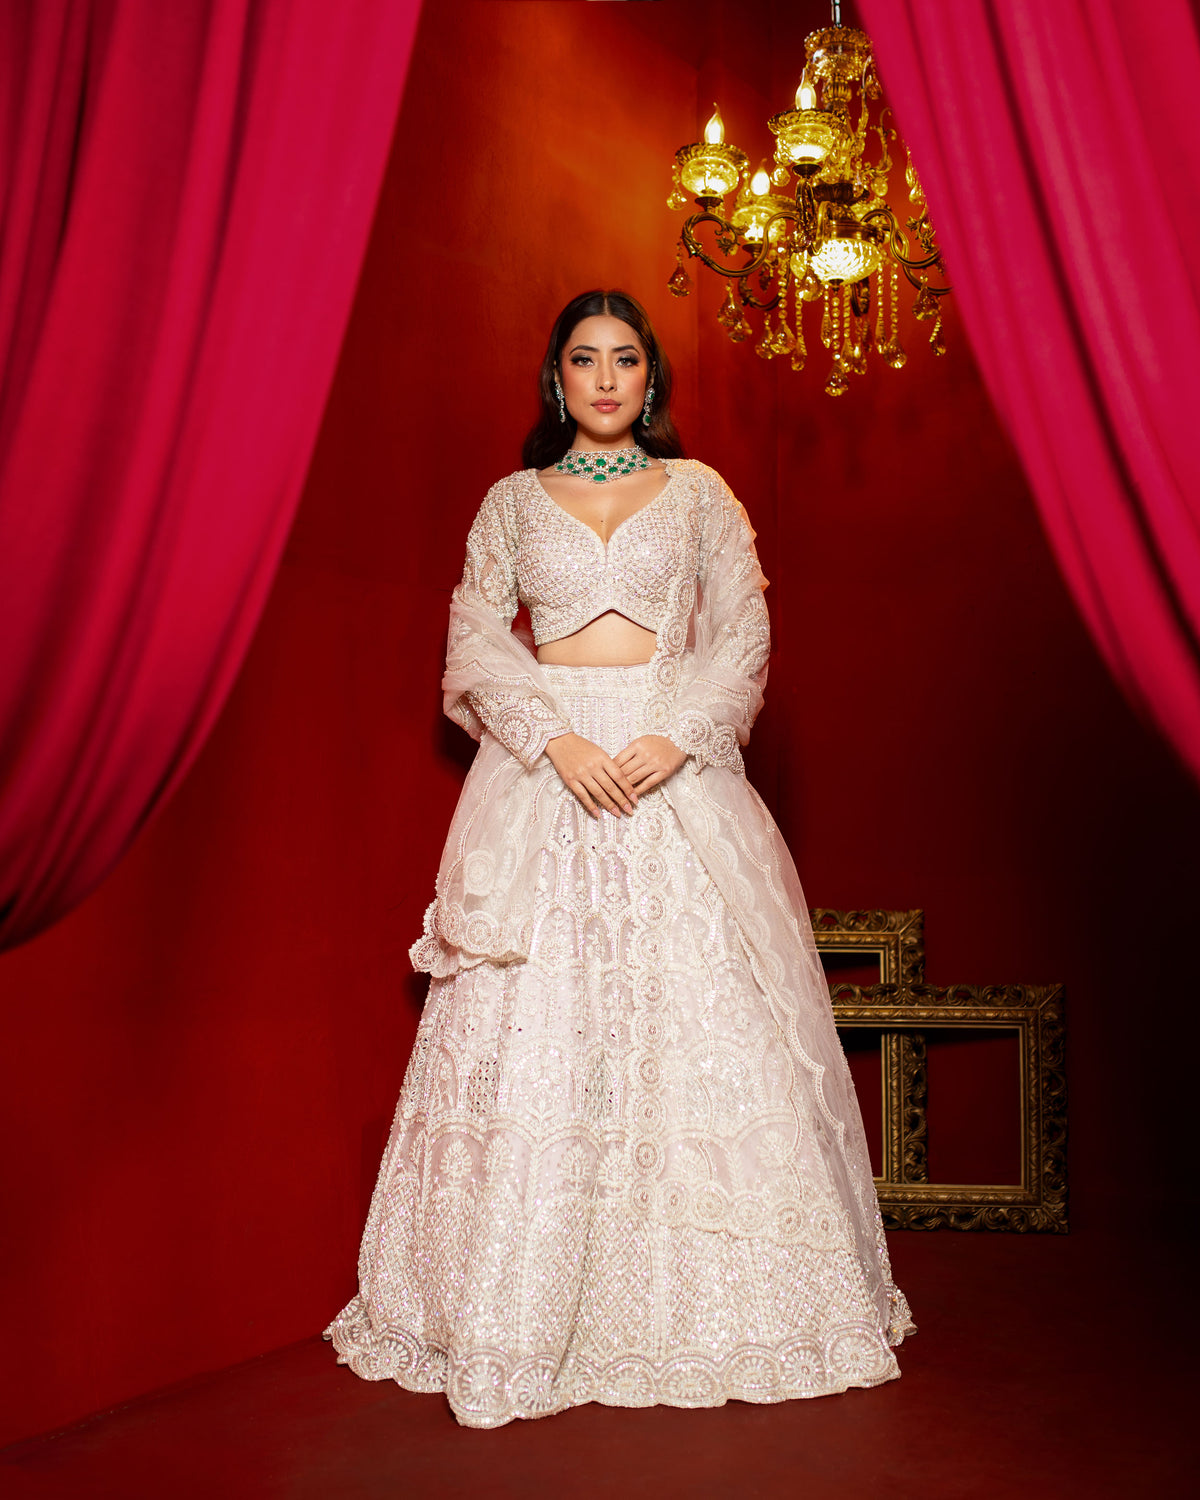 Soft Pink Net Lehenga Adorned With Mirrors, Pearls, and Intricate Threadwork